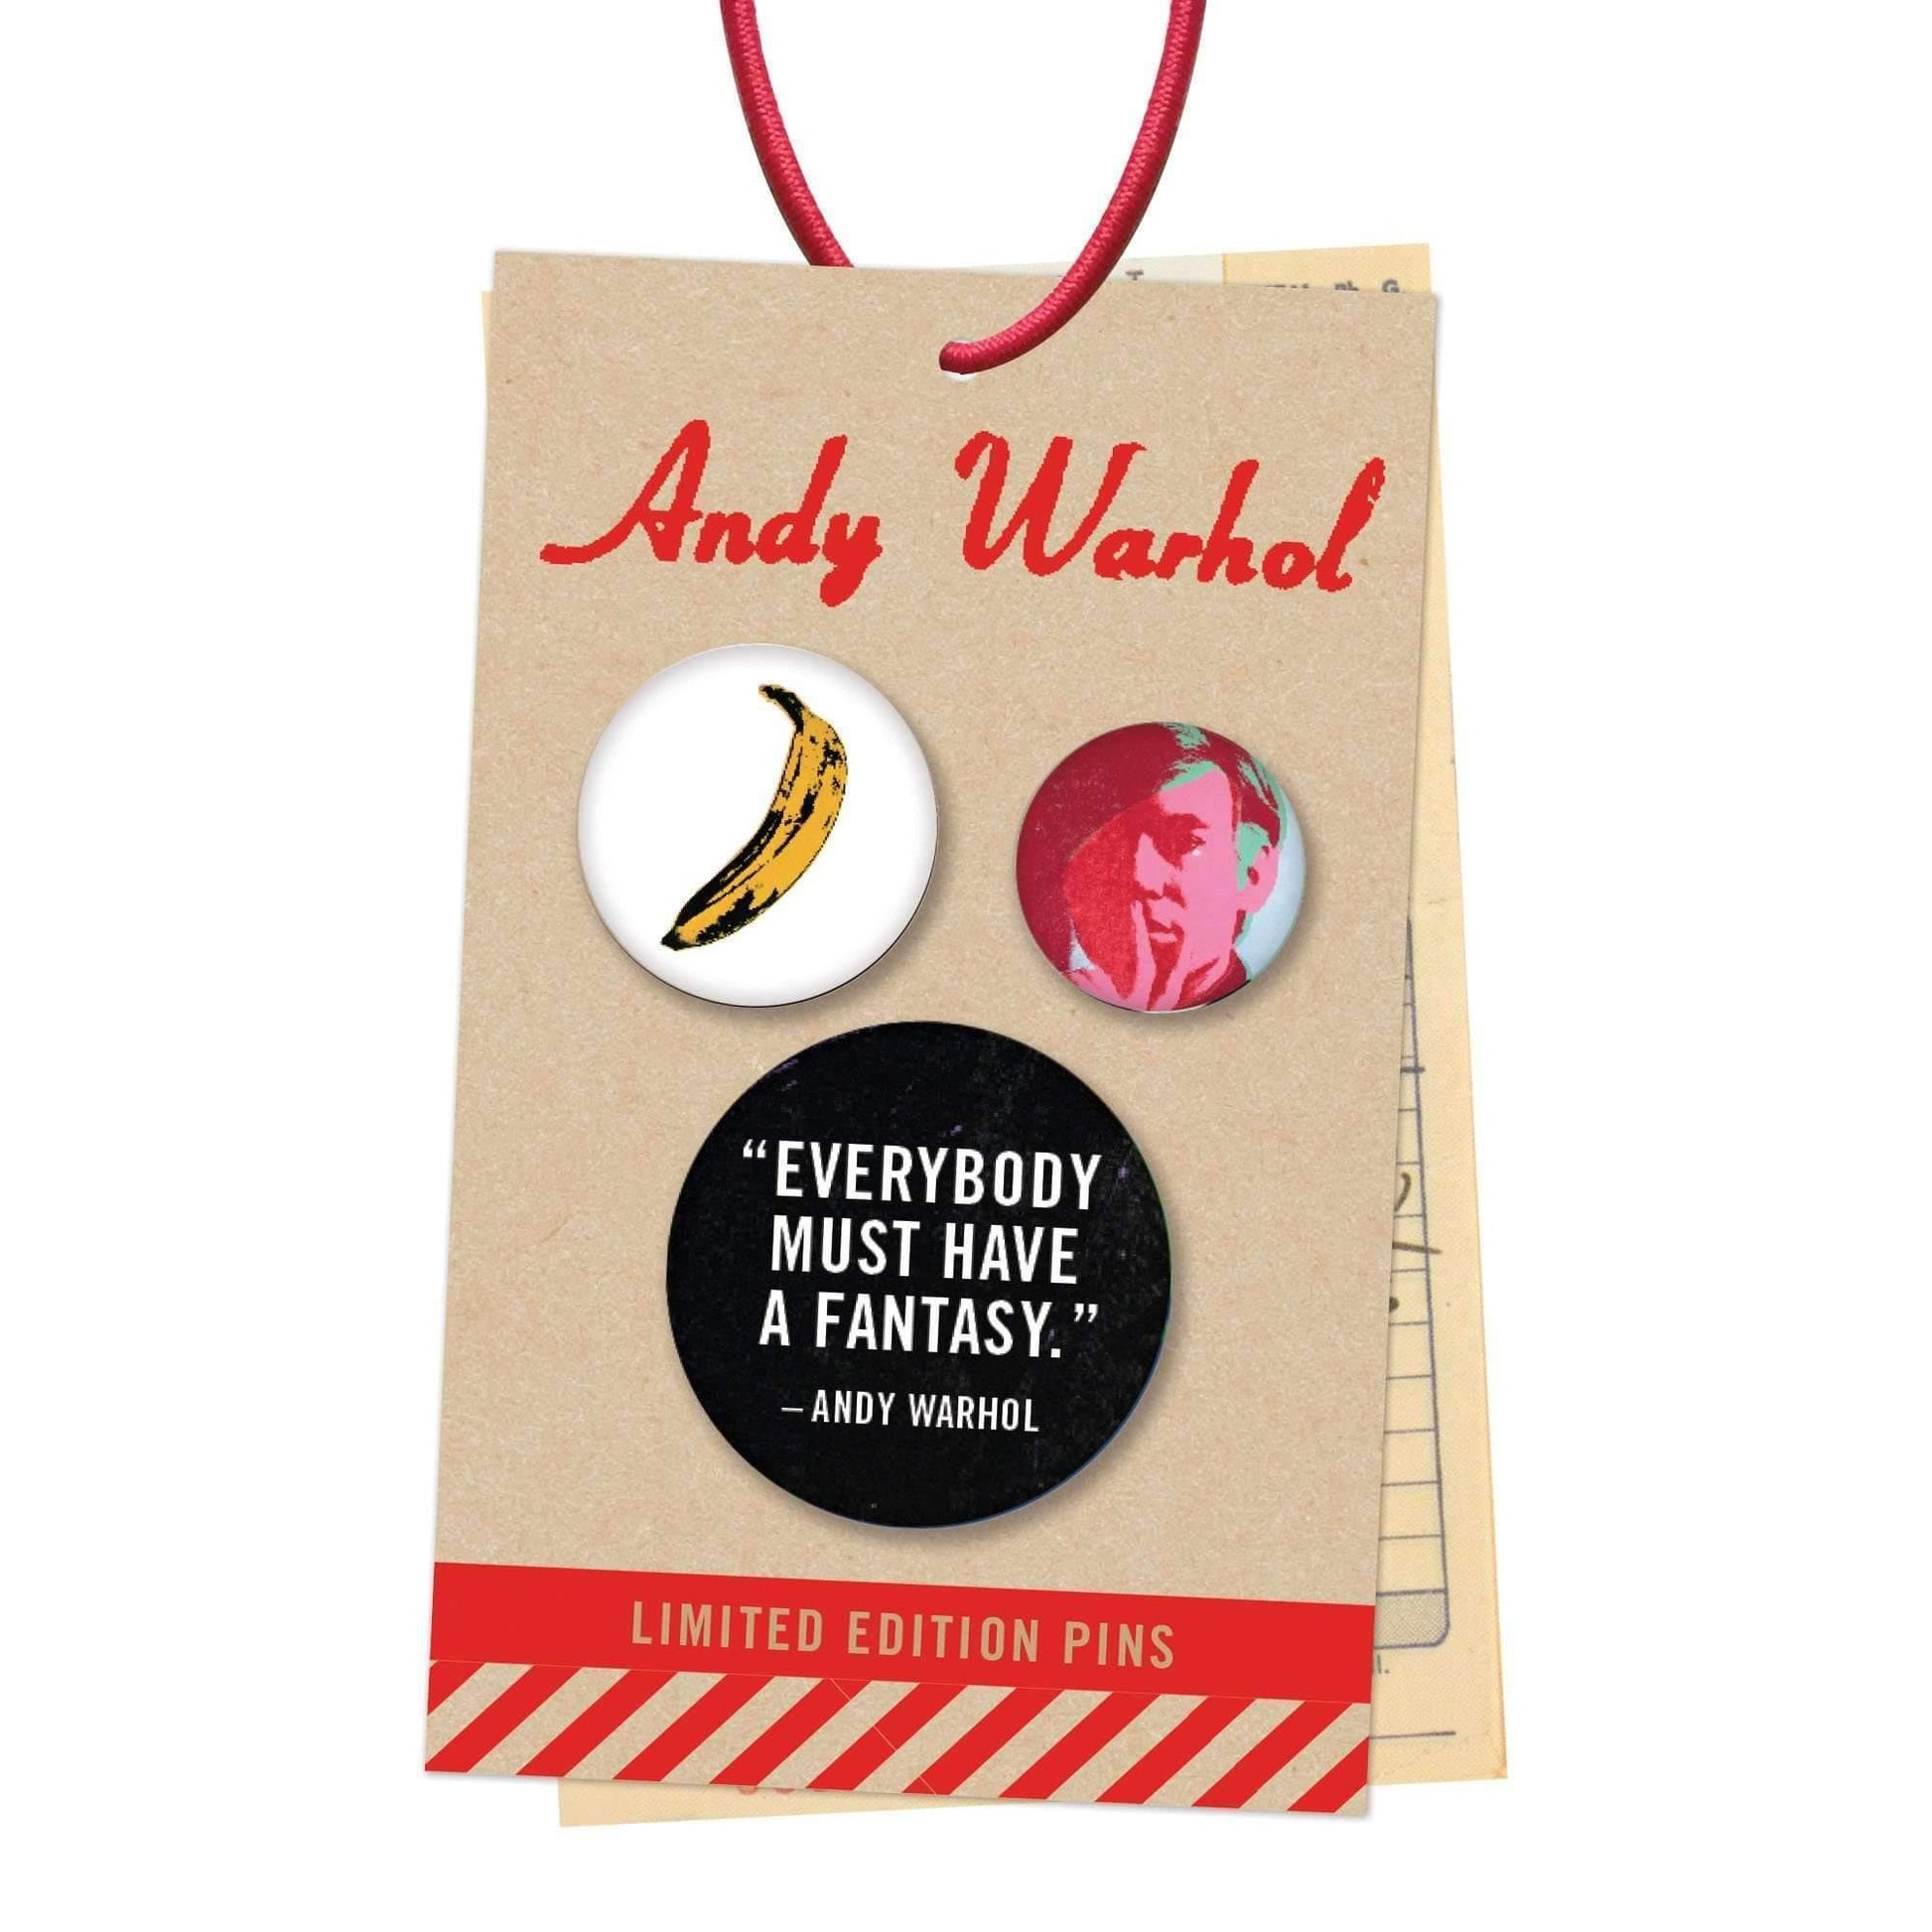 Andy Warhol Poppies Canvas Tote Bag Andy Warhol Poppies Canvas Tote Bag 